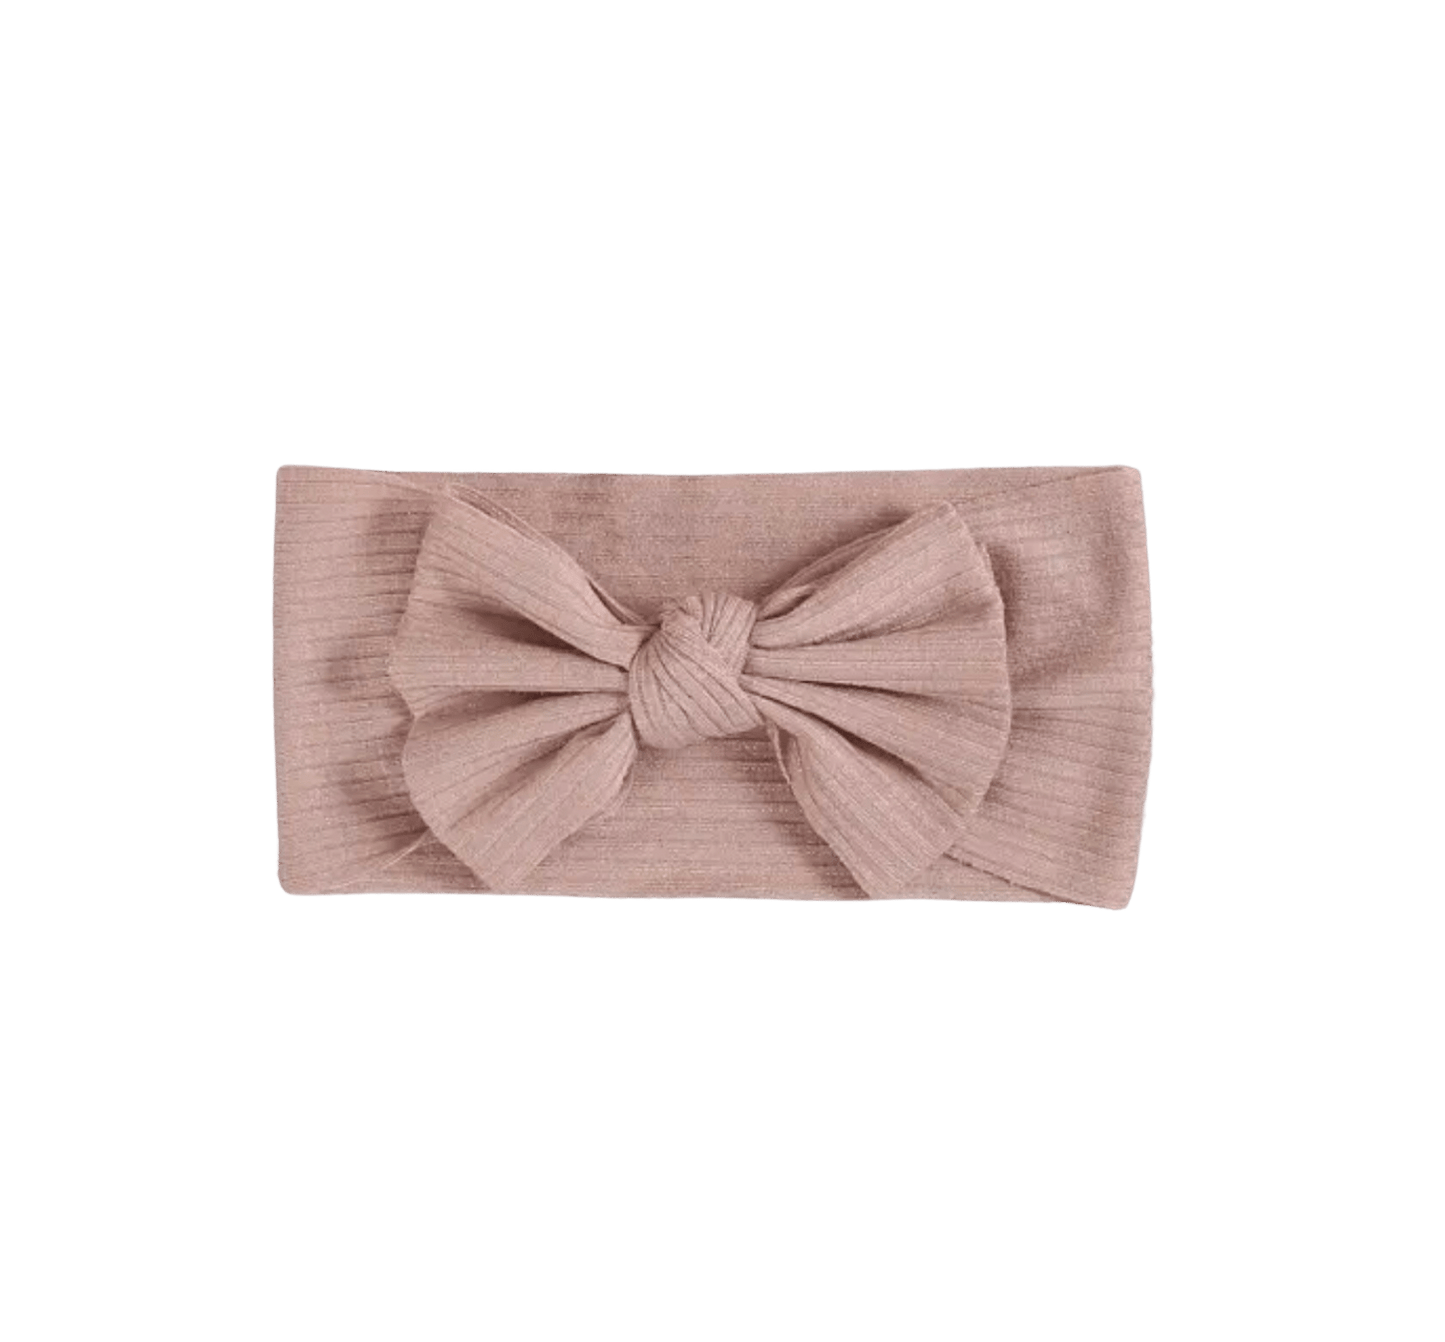 Ribbed bow headwrap in sandy pink